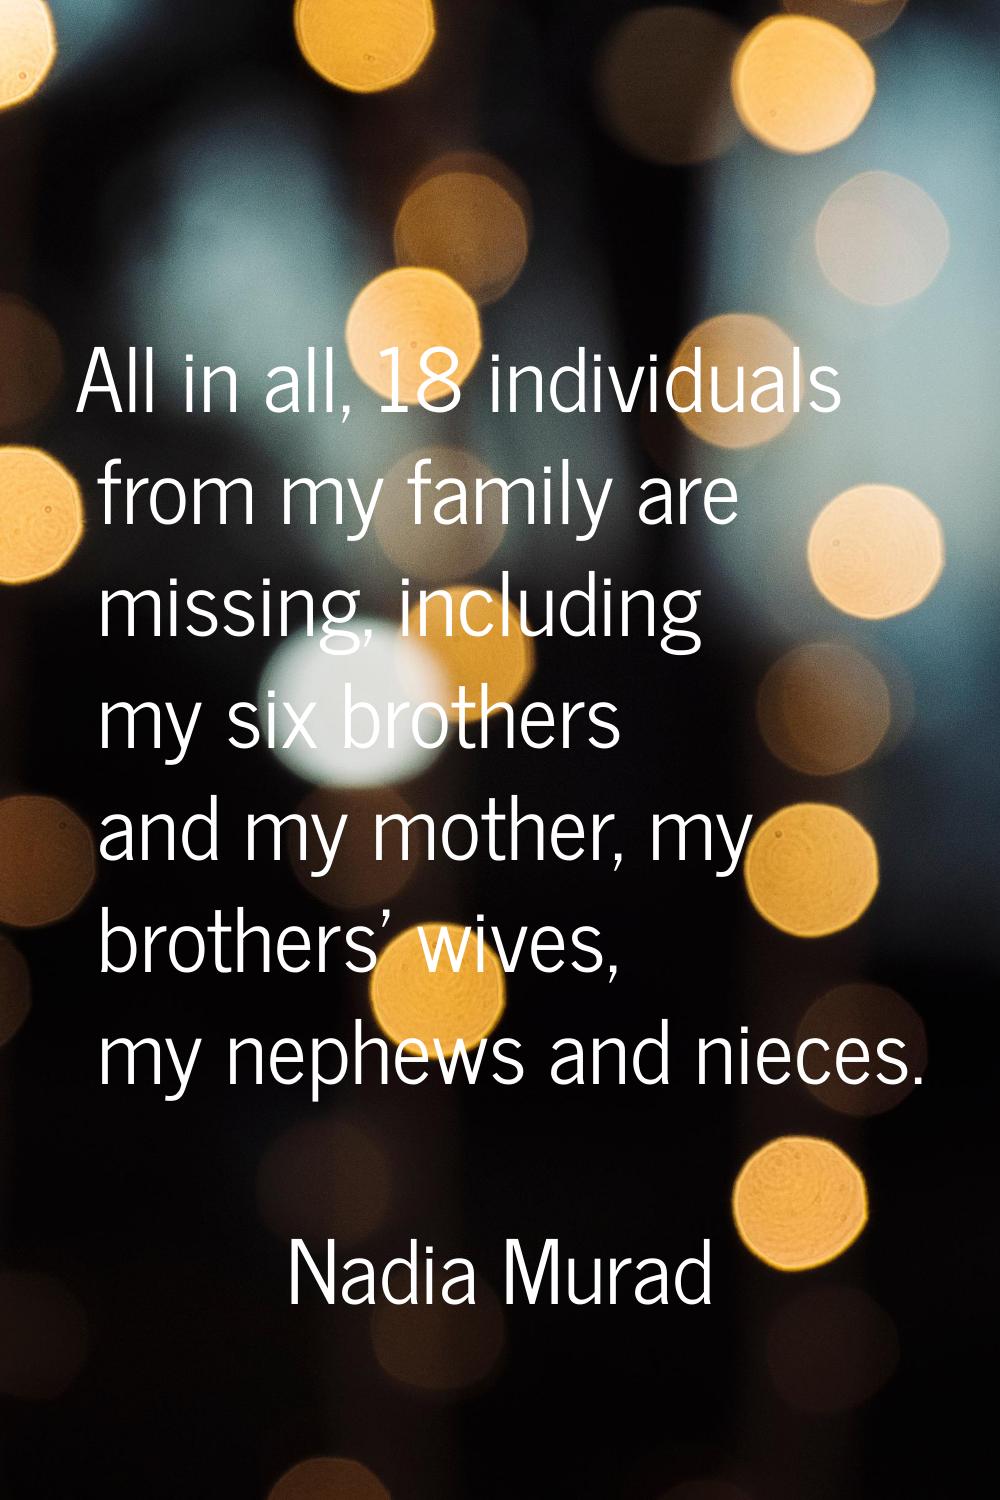 All in all, 18 individuals from my family are missing, including my six brothers and my mother, my 